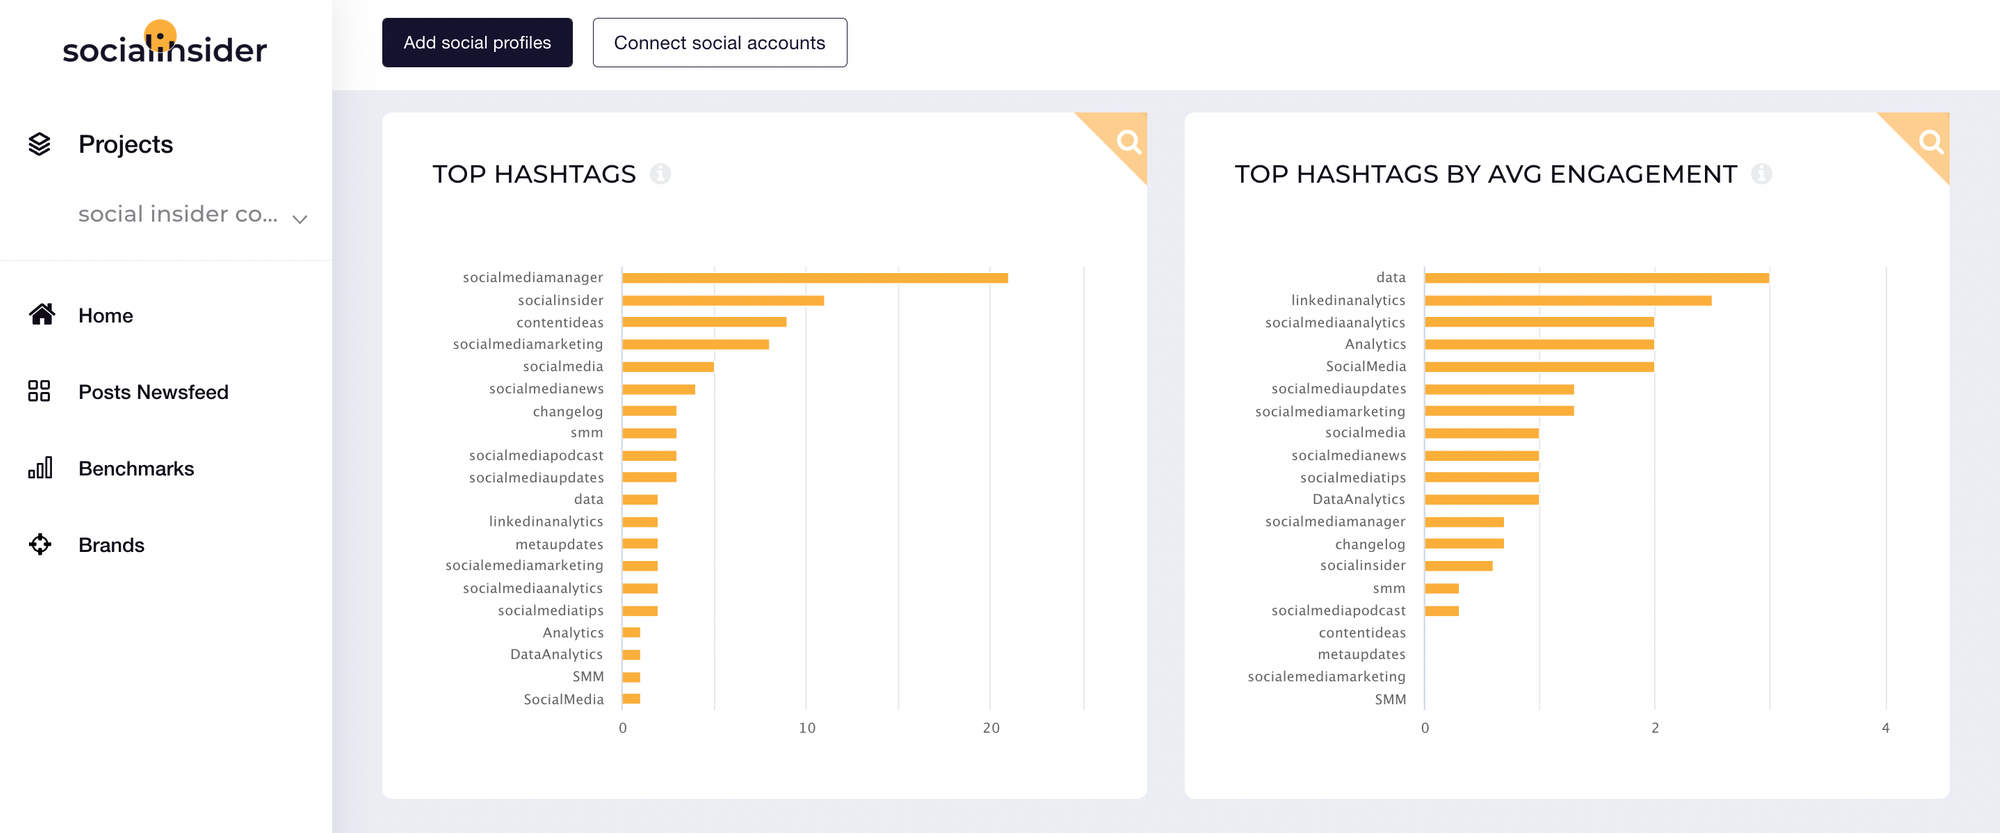 This picture shows Twitter top hashtags